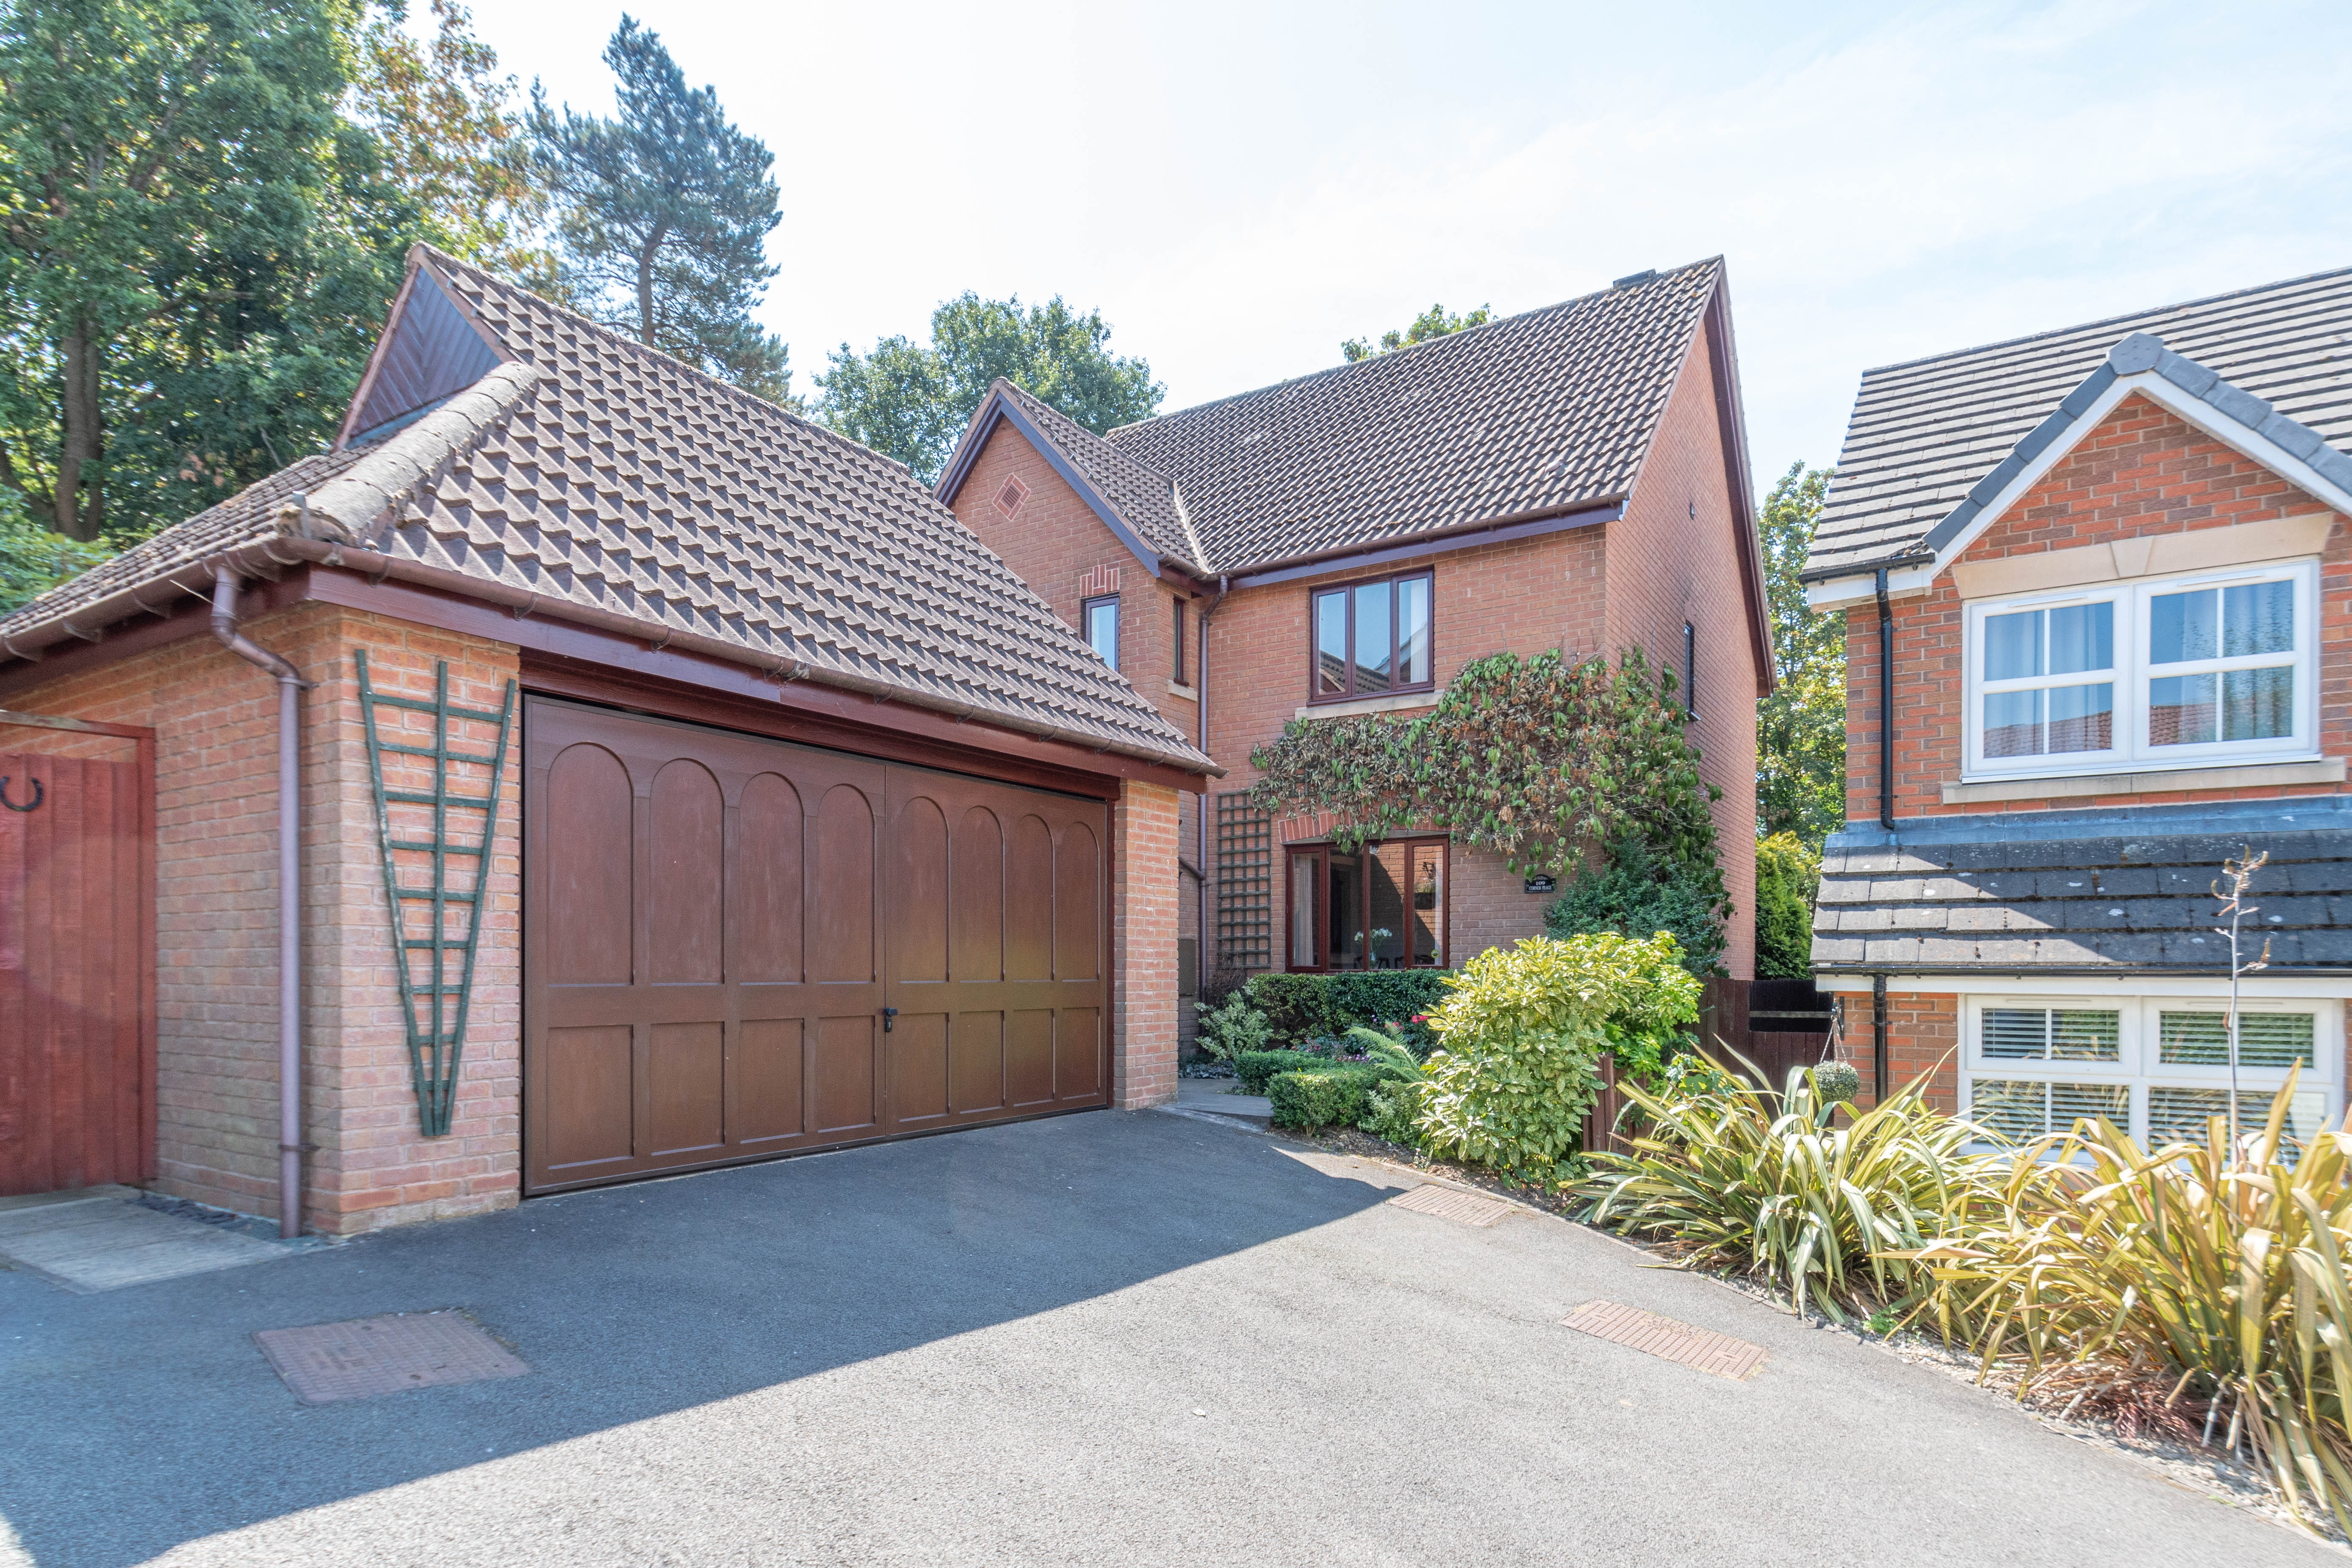 4 bed house for sale in Foxholes Lane, Callow Hill 24